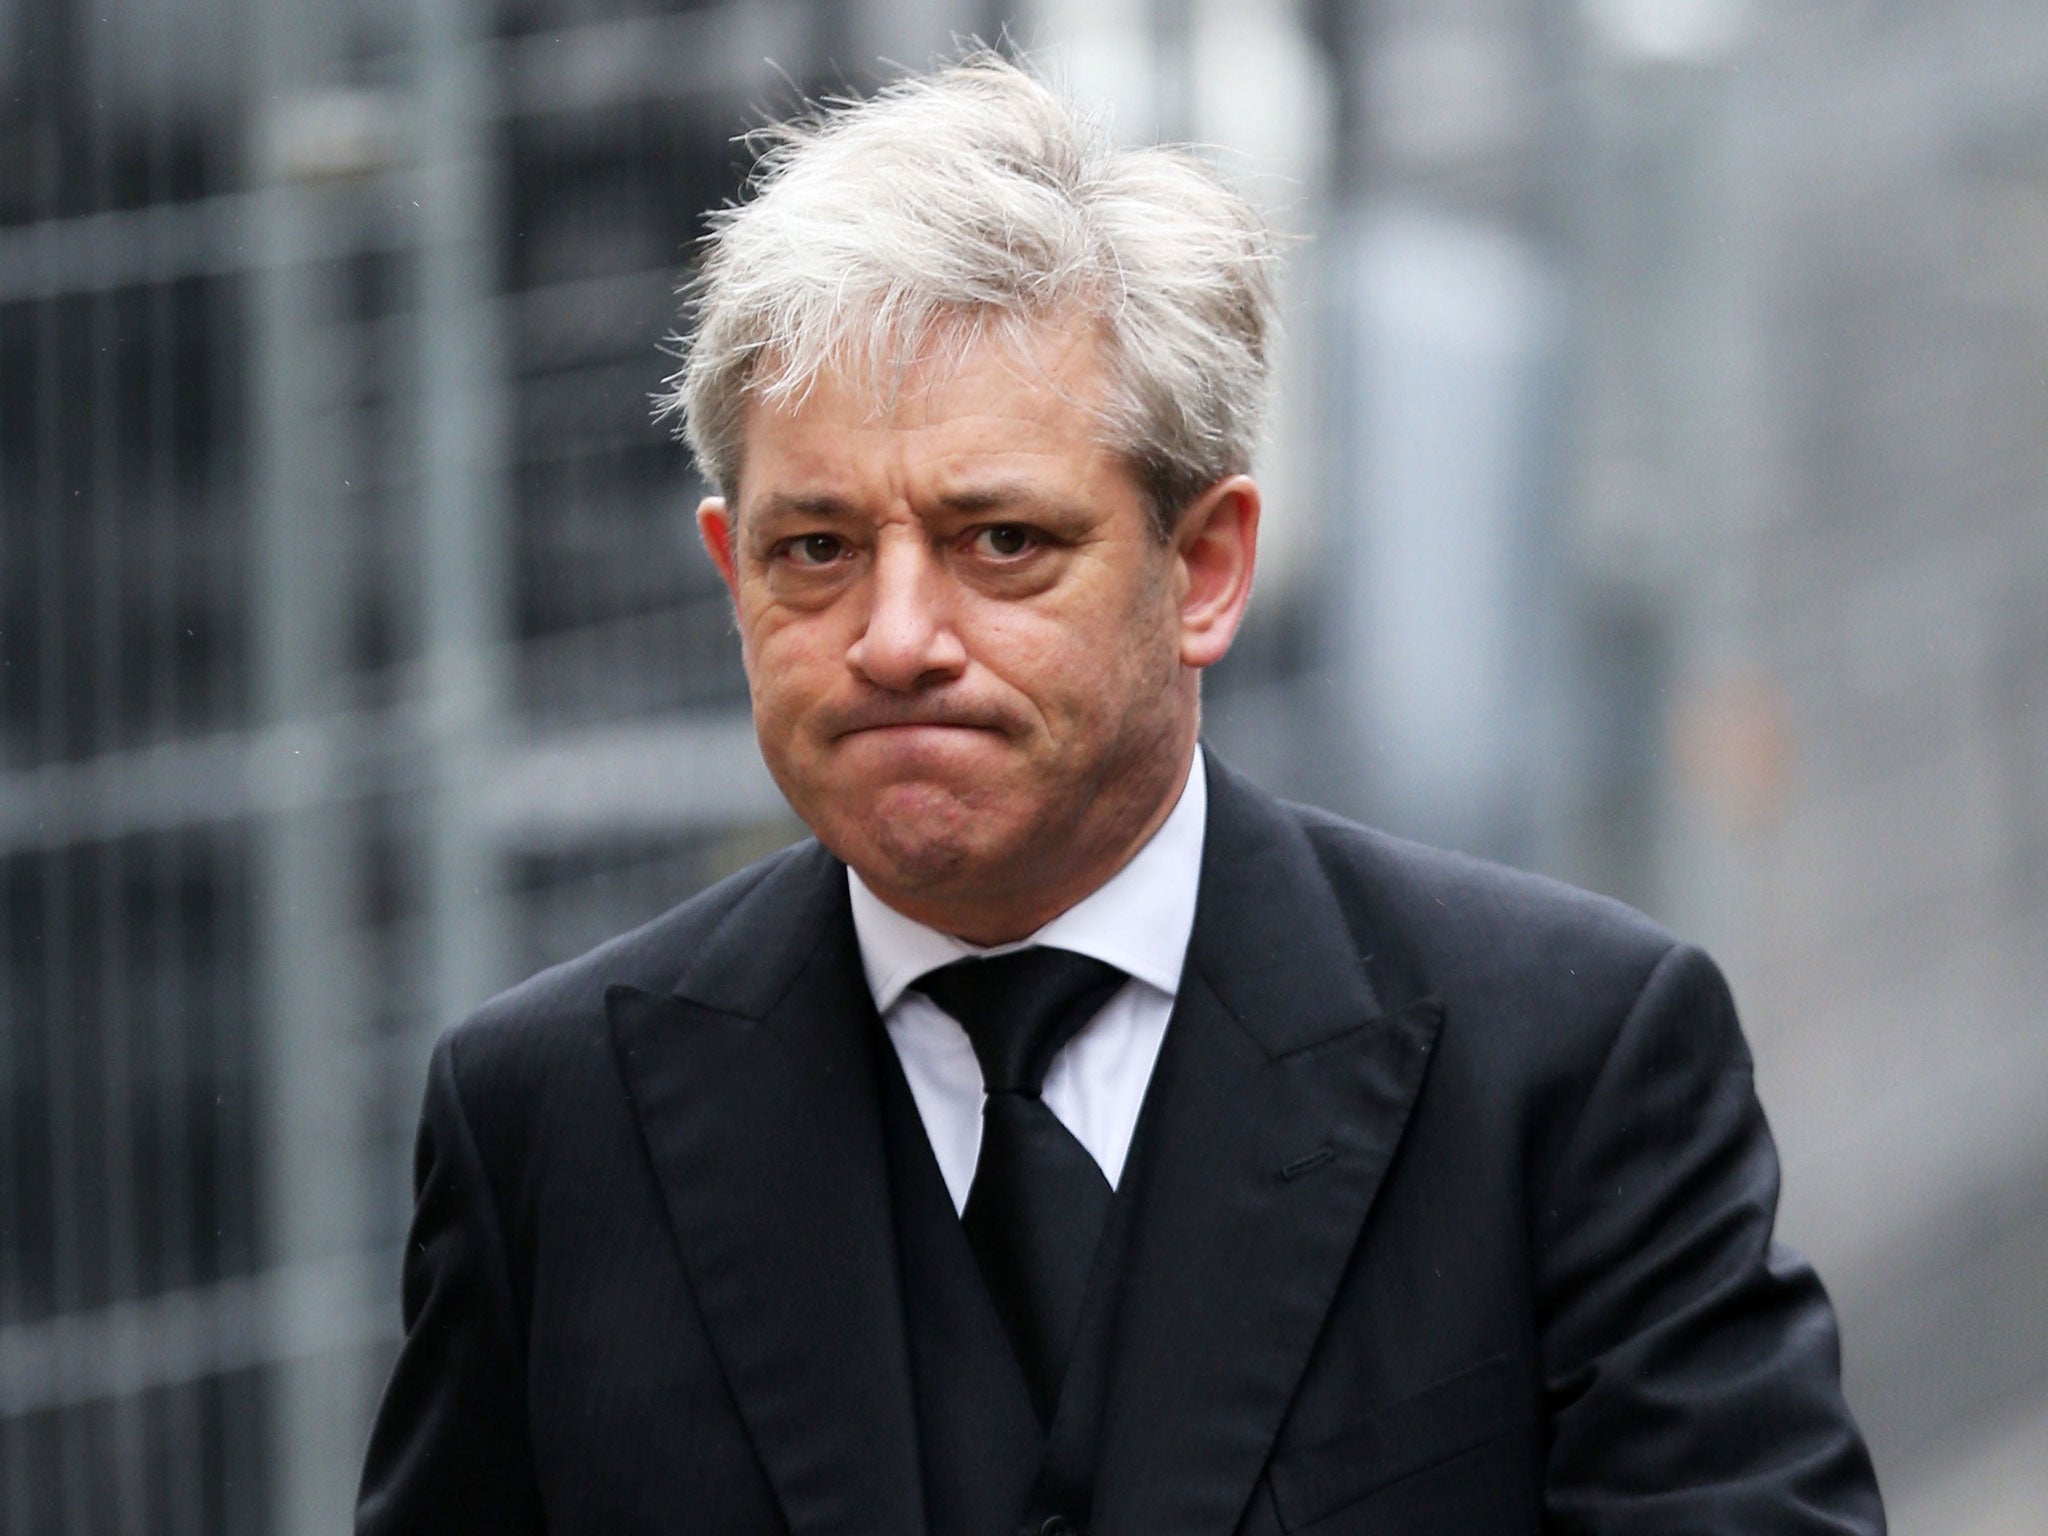 Bercow also dismissed the idea that he had become a "sex symbol" since becoming Deputy Speaker